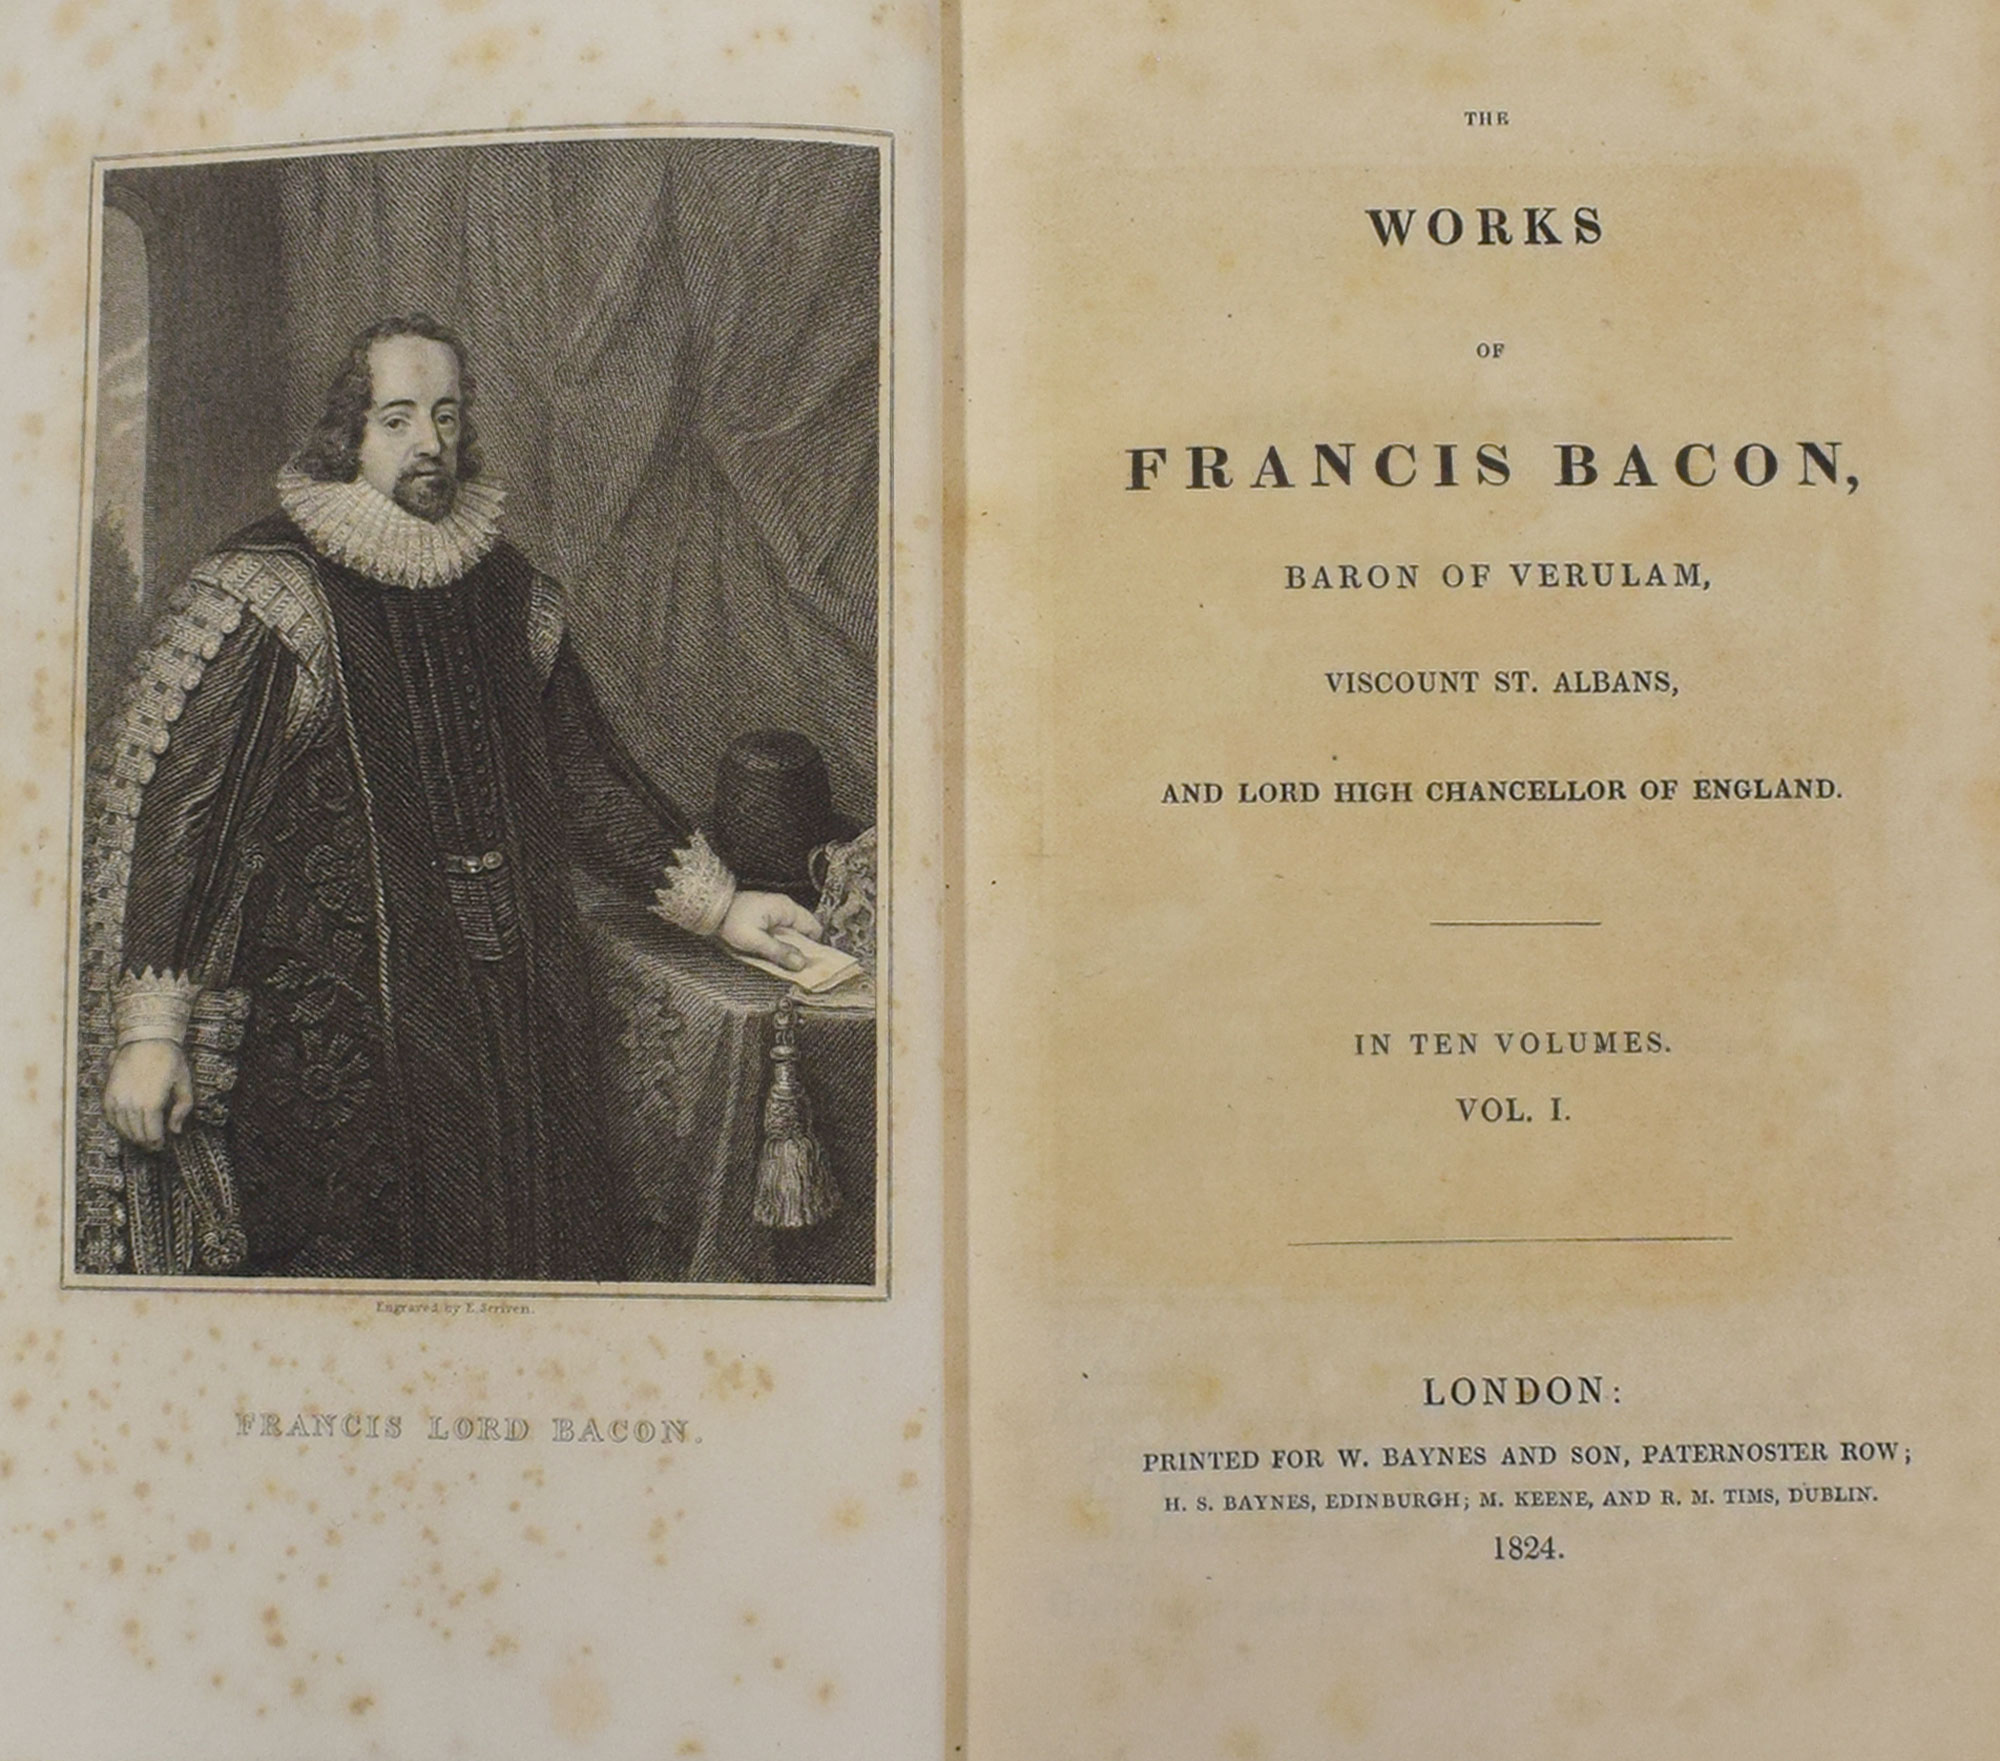 The Works of Francis Bacon, Baron of Verulam, Viscount St. Albans, and Lord High Chancellor of England. 10 volume set.